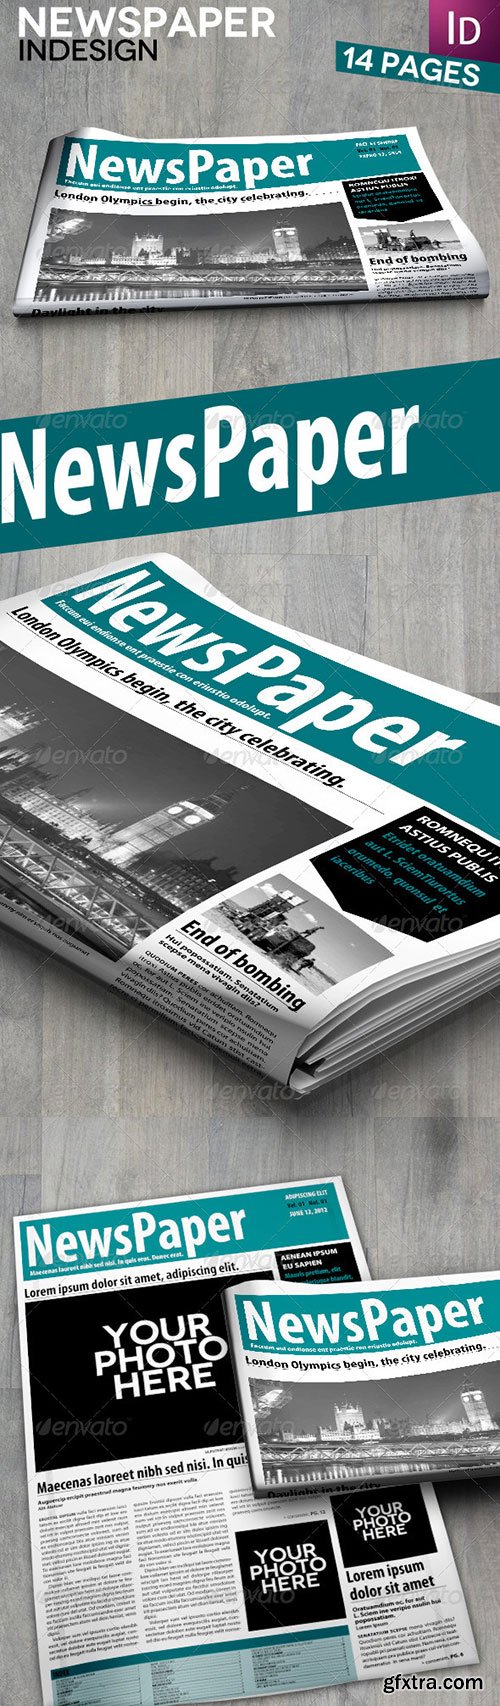 GraphicRiver - InDesign Newspaper 14 Pages